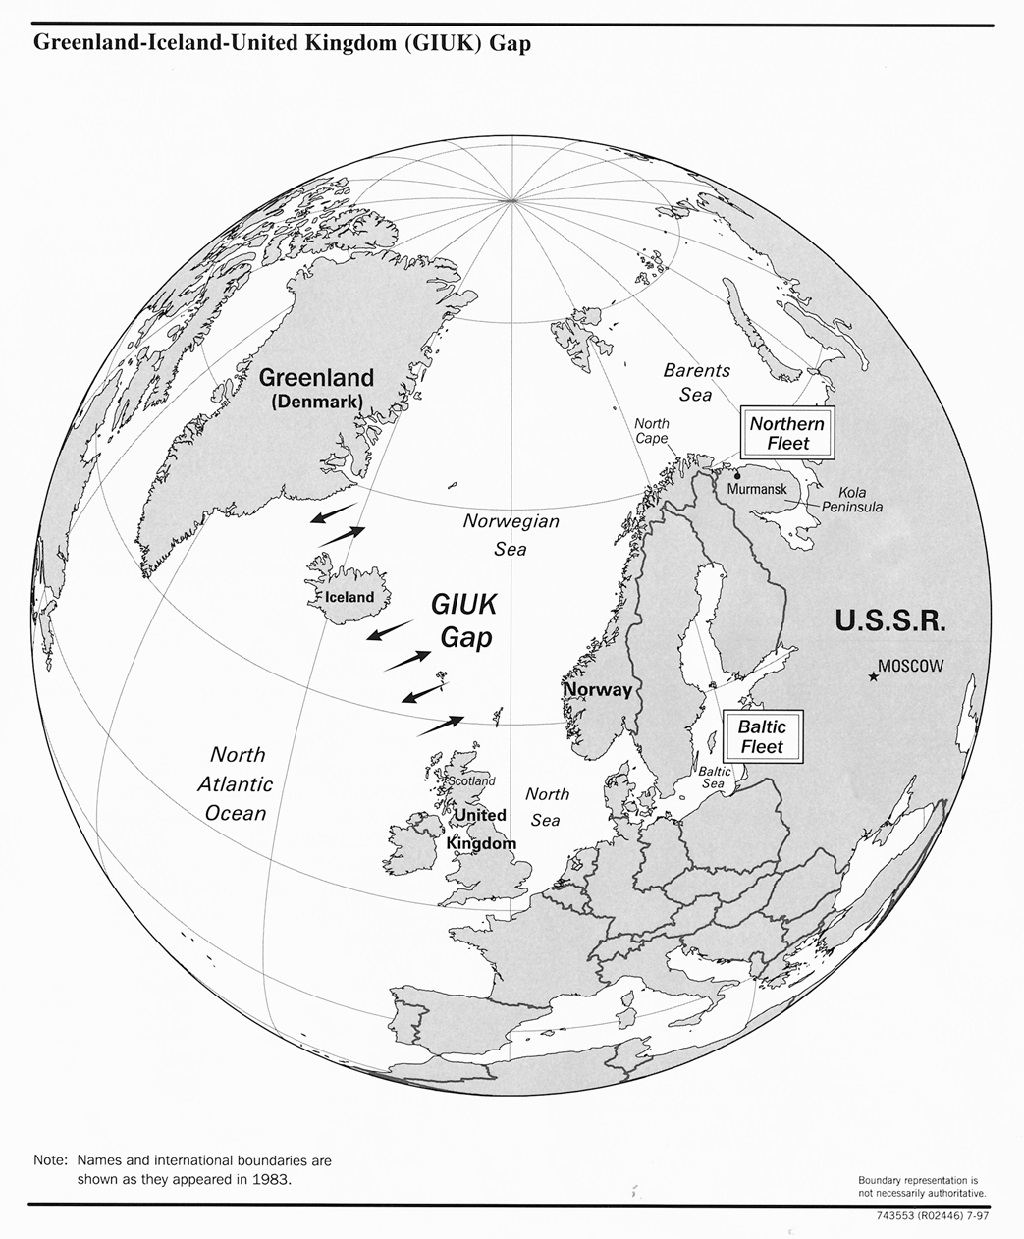 The Greenland-Iceland-United Kingdom GIUK Gap / Defense Express / It Took 4.5 Years for russia to Repair AS-31 Losharik Nuclear-Powered Sabotage Submarine